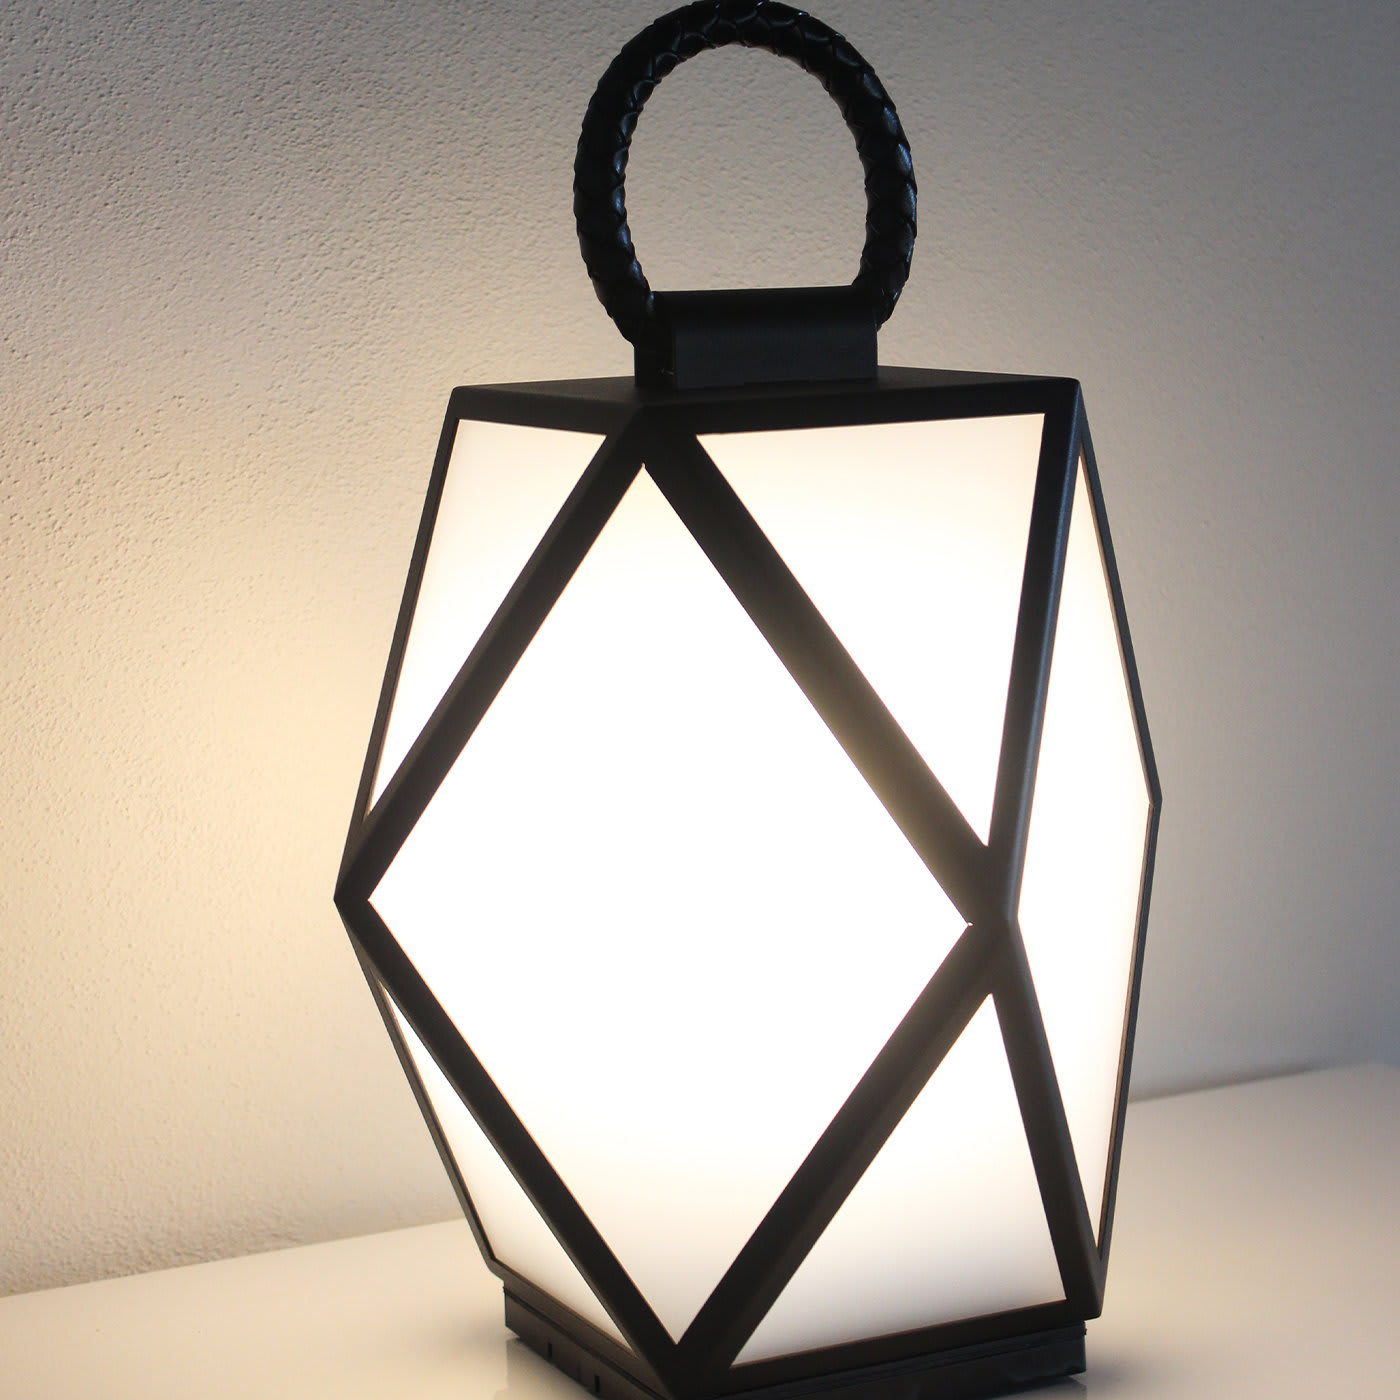 Muse Black Outdoor Table Lamp by Tristan Auer - Contardi Lighting